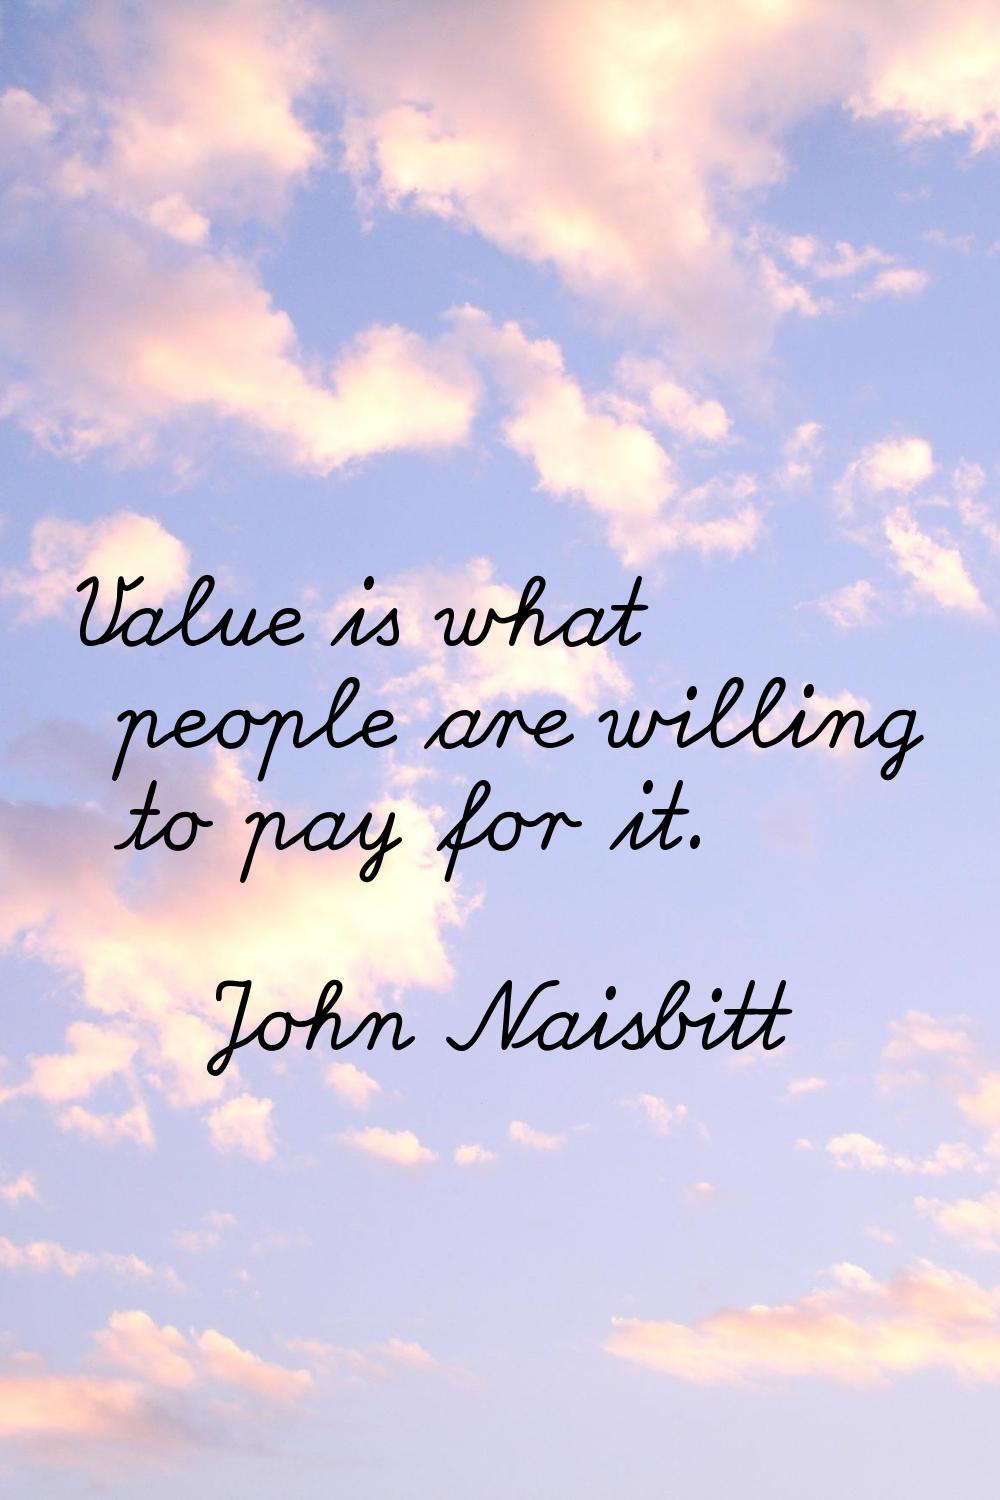 Value is what people are willing to pay for it.